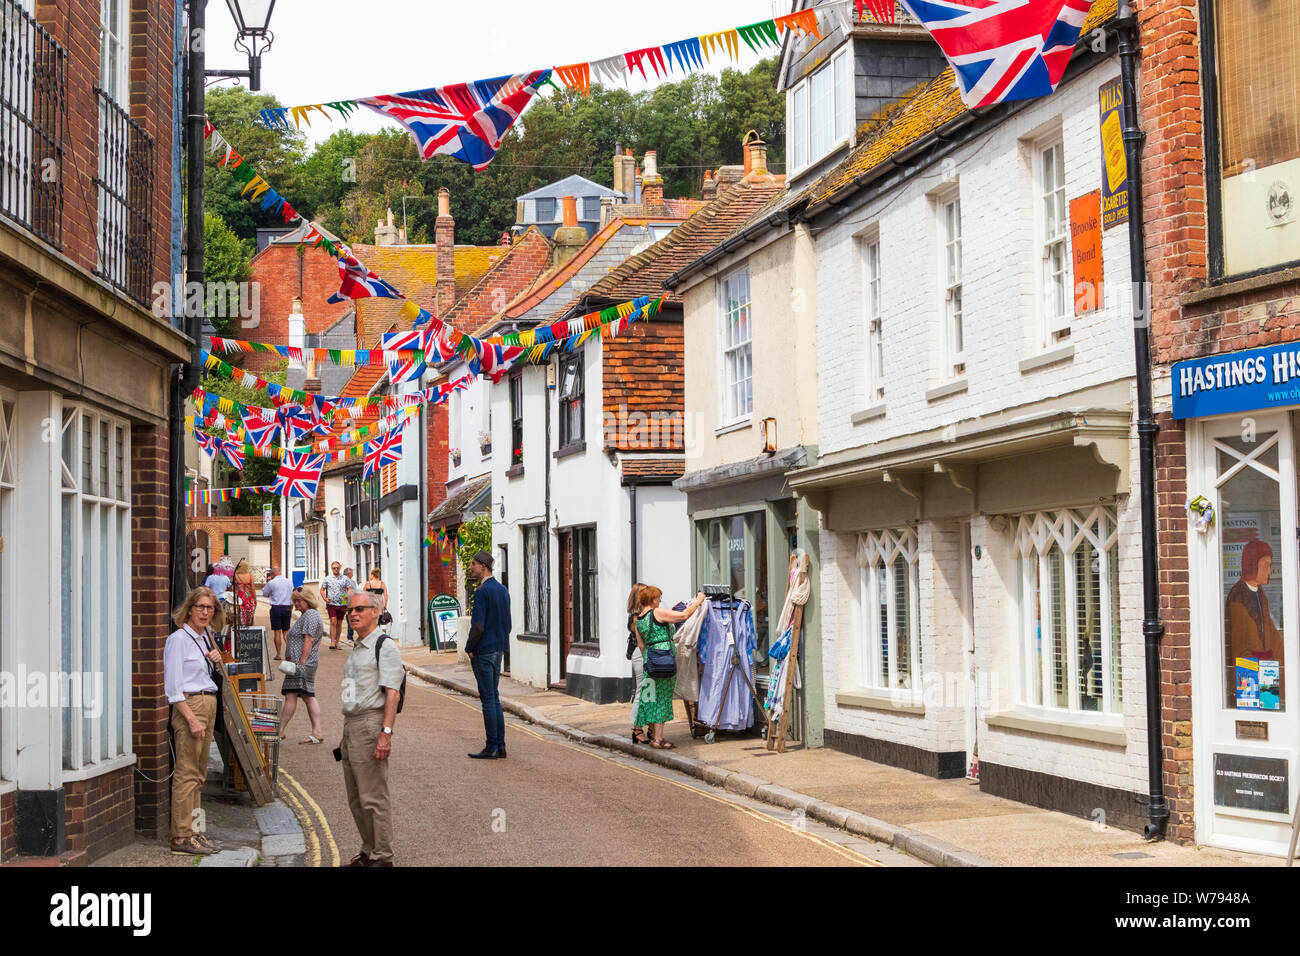 Hastings old town, east sussex, Regno Unito Foto Stock